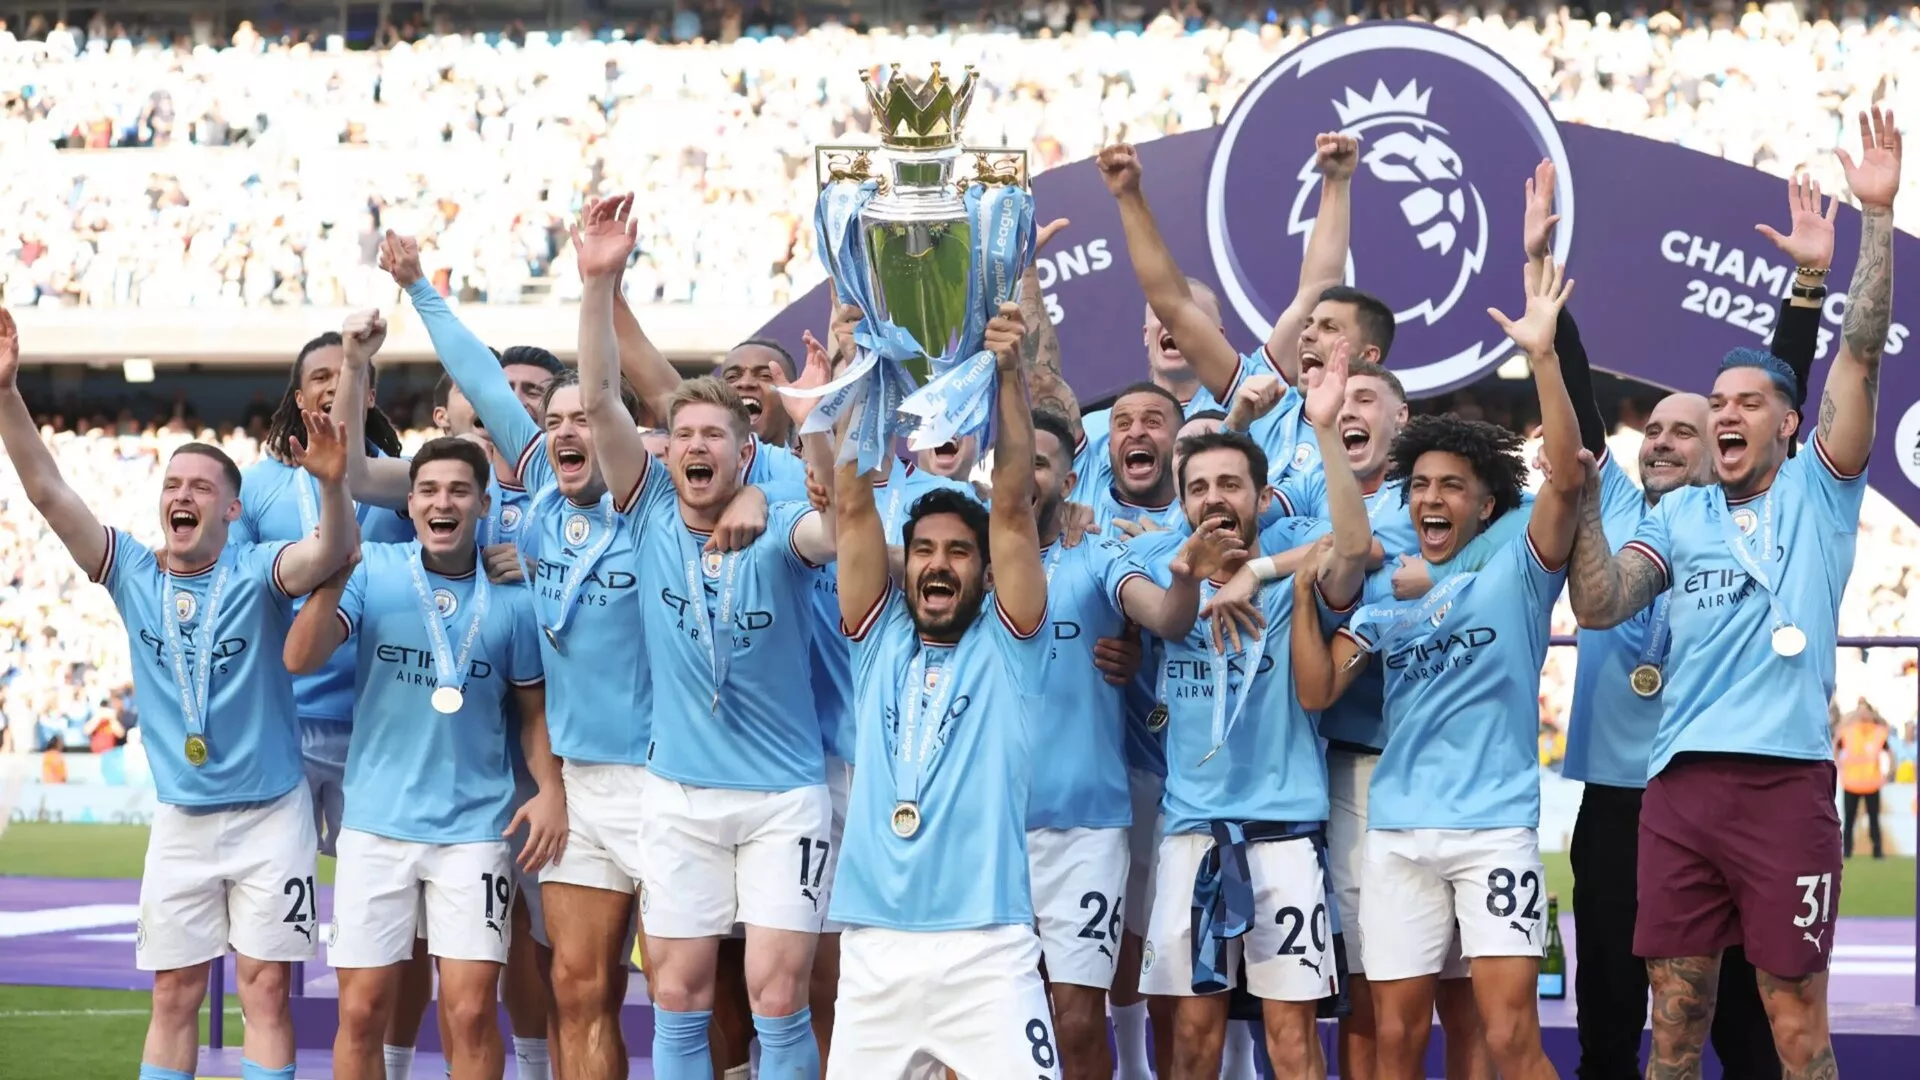 Champions League prize money breakdown 2022/2023: How much do the